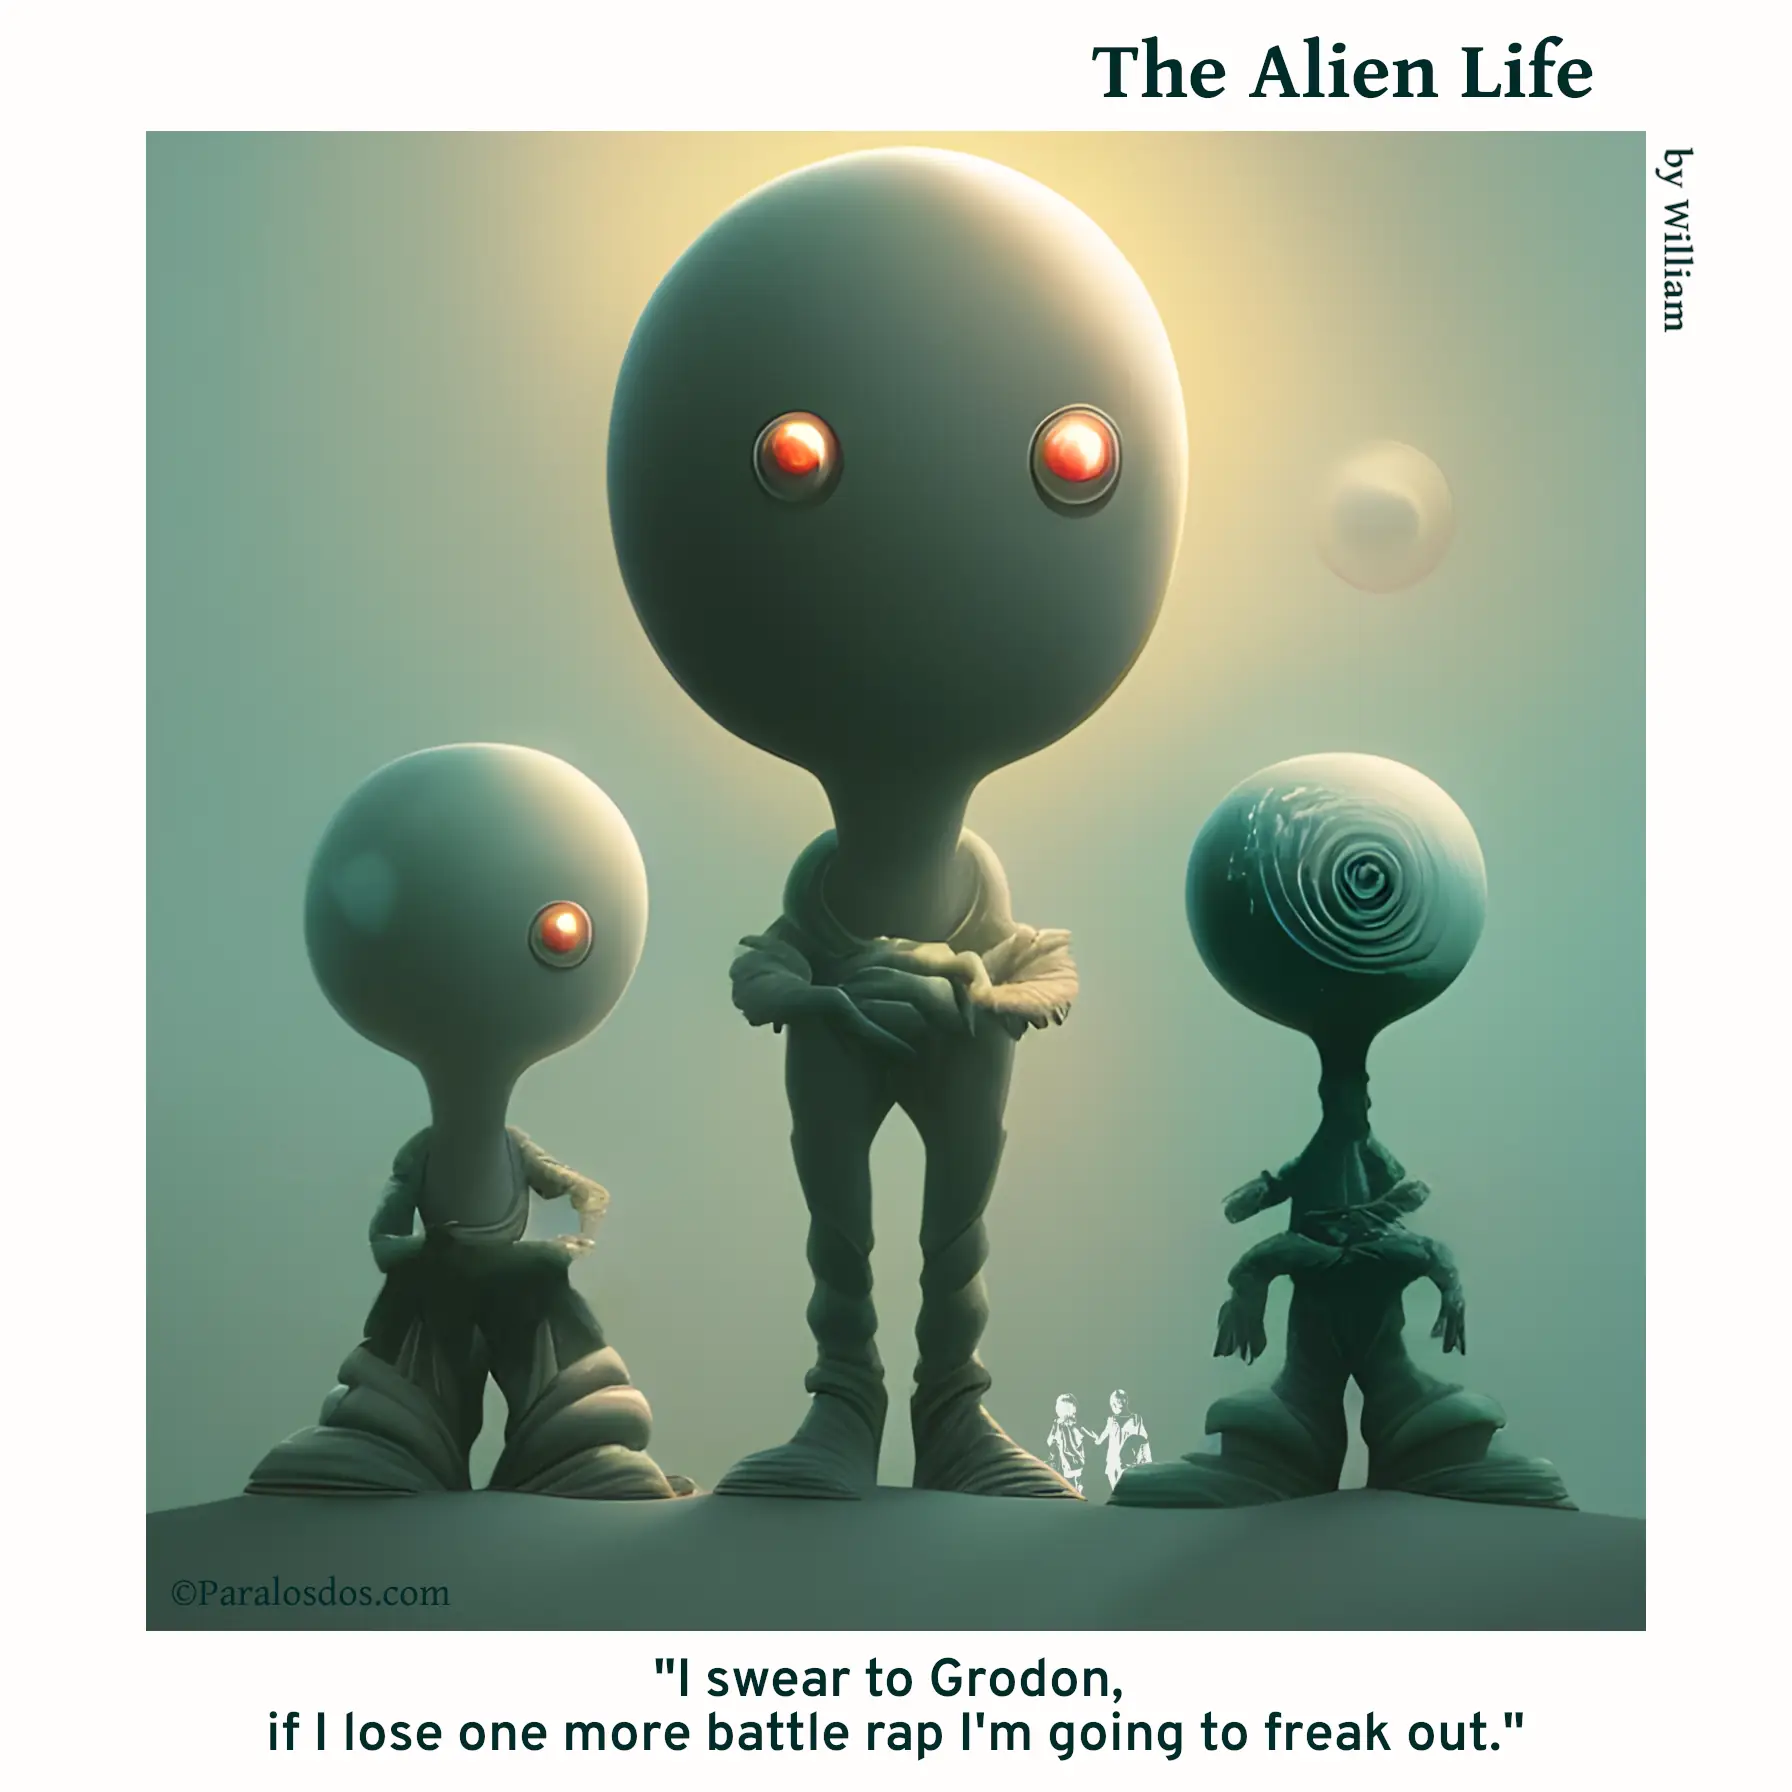 The Alien Life, one panel Comic.Three aliens are standing in hip hop clothes, the one in the middle is much bigger. The caption reads: "I swear to Grodon, if I lose one more battle rap I'm going to freak out."